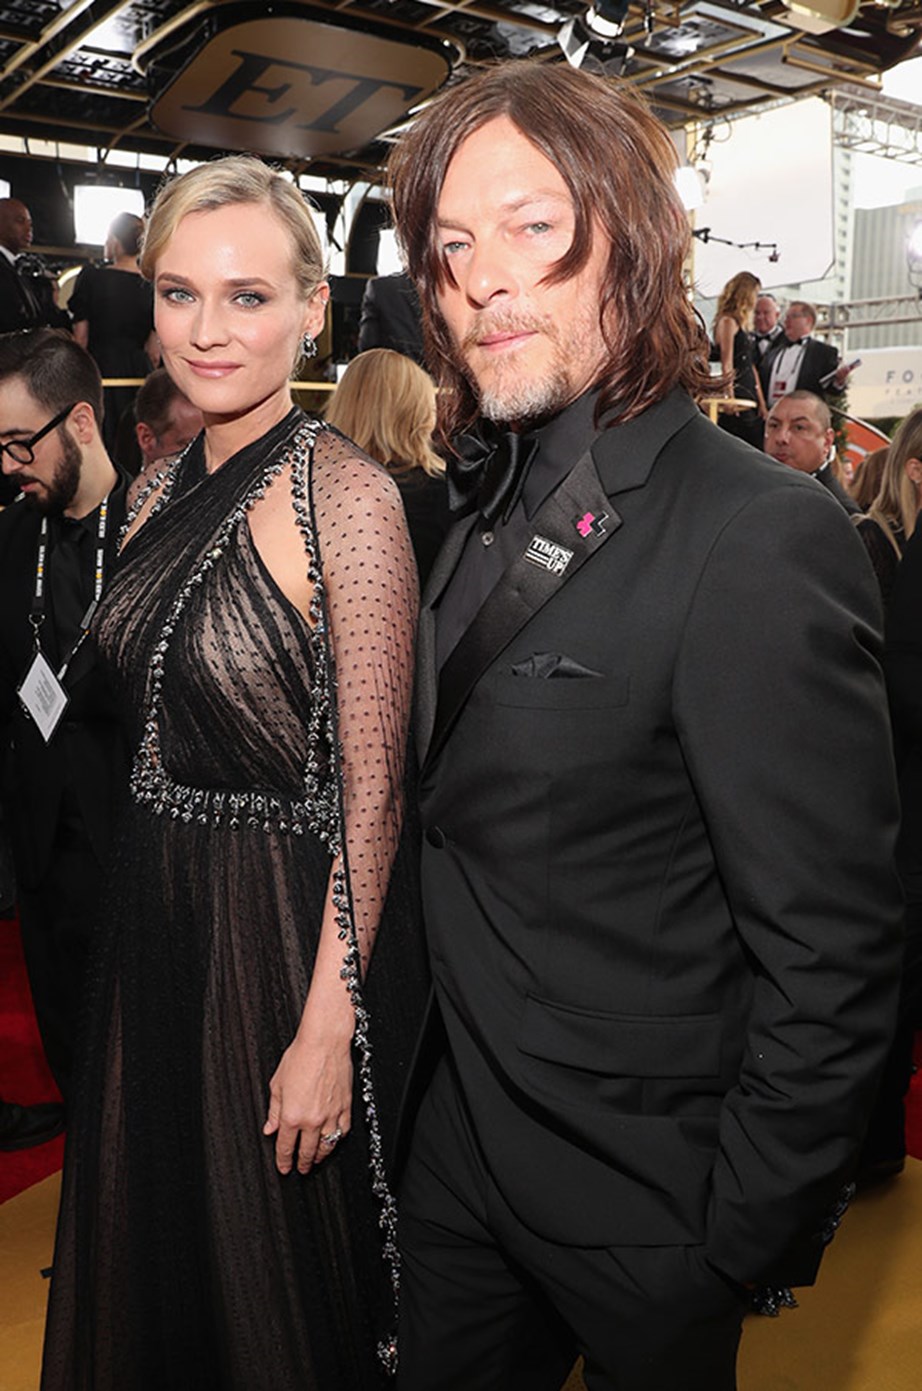 Diane Kruger and Norman Reedus have the look of lurve!